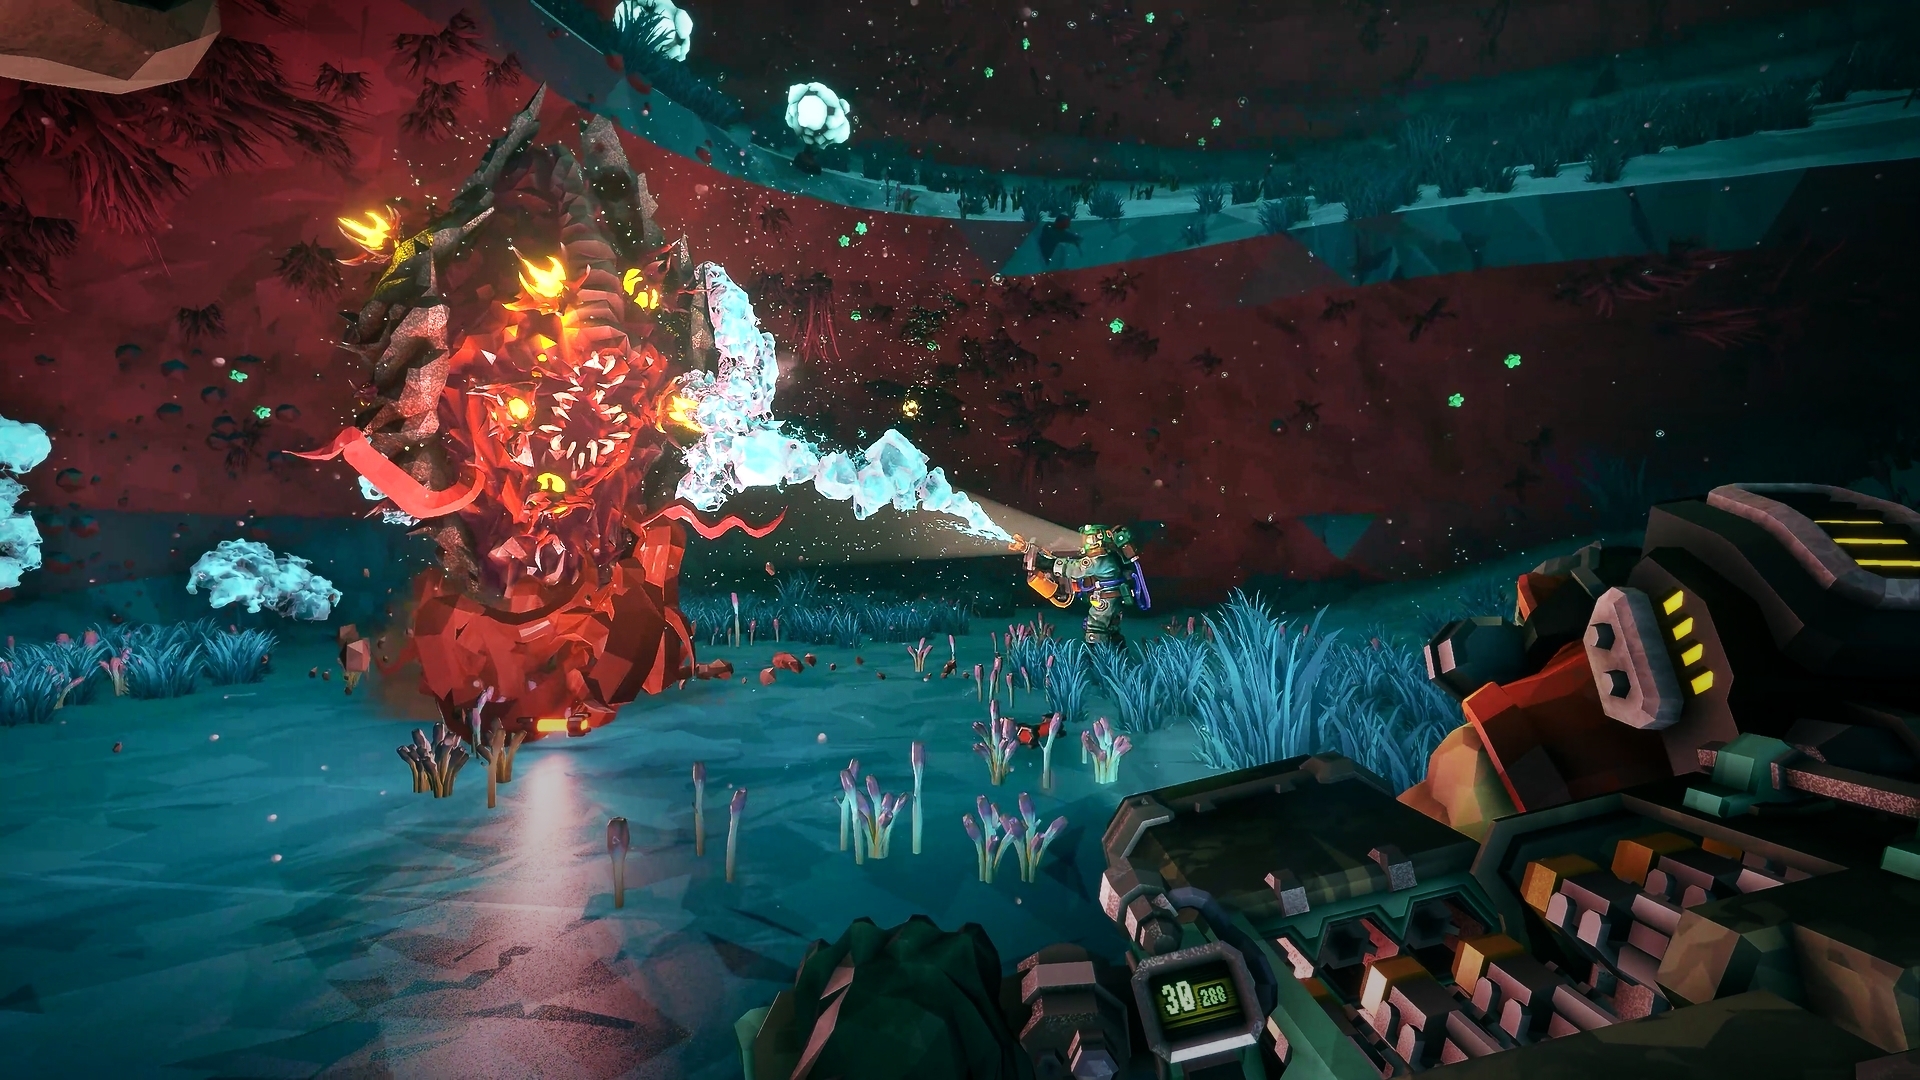 Deep Rock Galactic season 4 is now live, adding new enemies and a special  beer